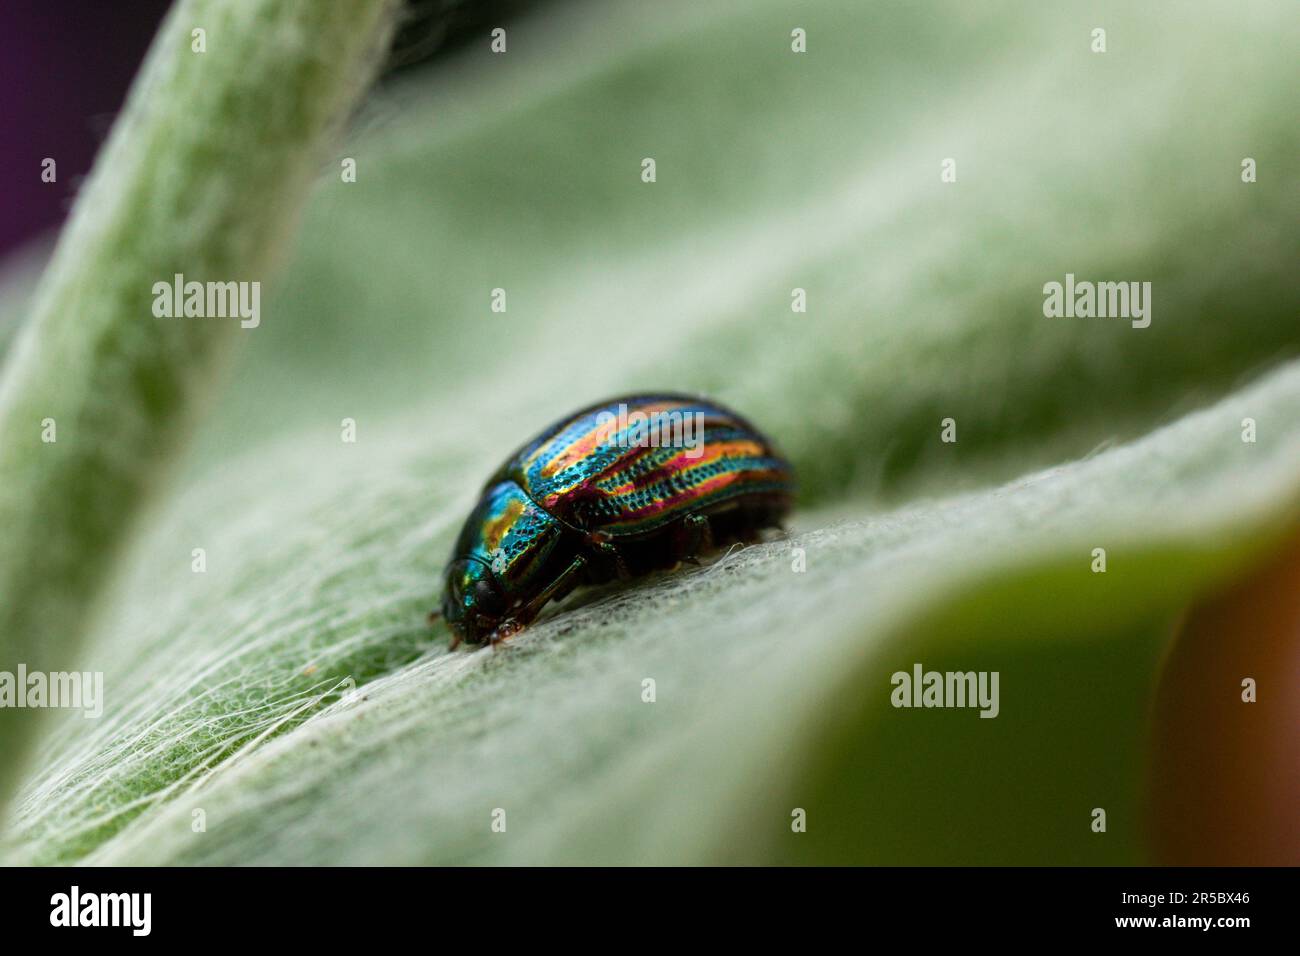 shiny multi colored beetle sitting on a green leaf Stock Photo